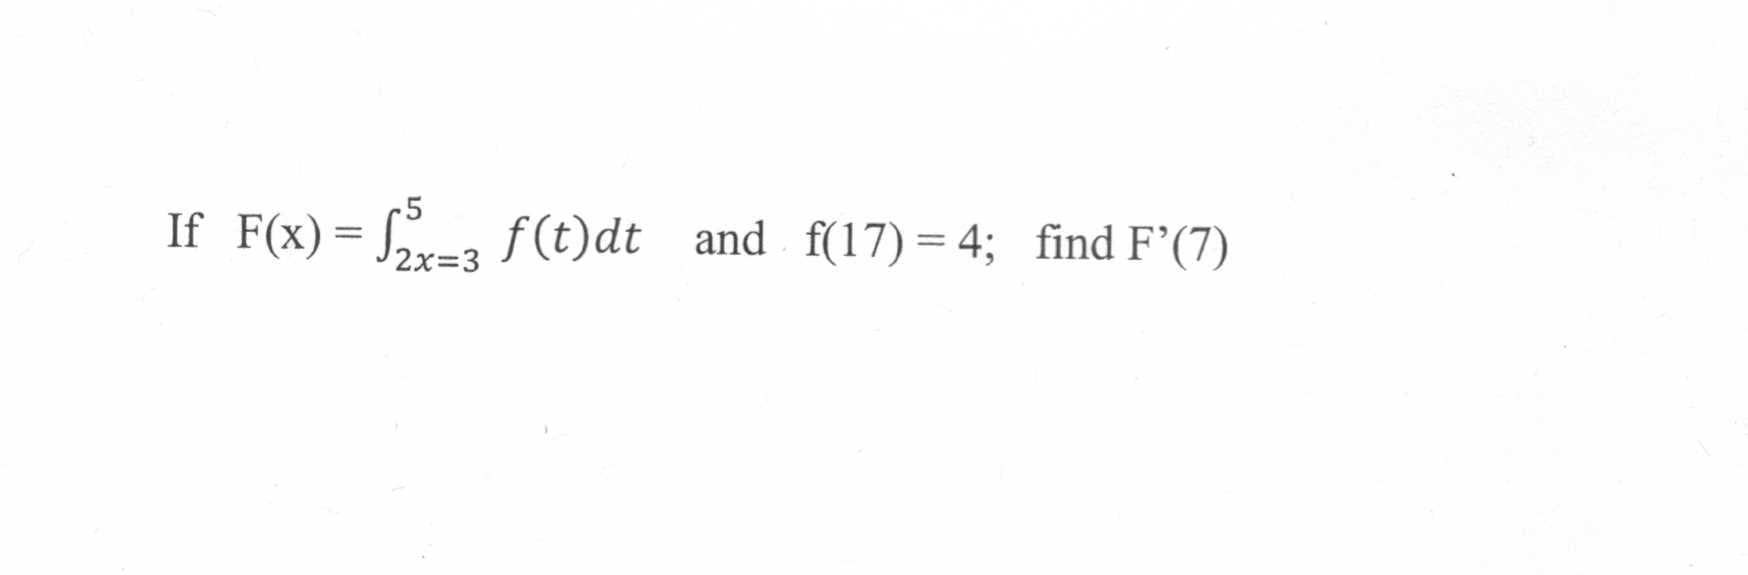 If F(x)= -3
f (t)dt and f(17) = 4; find F'(7)
2x=3
